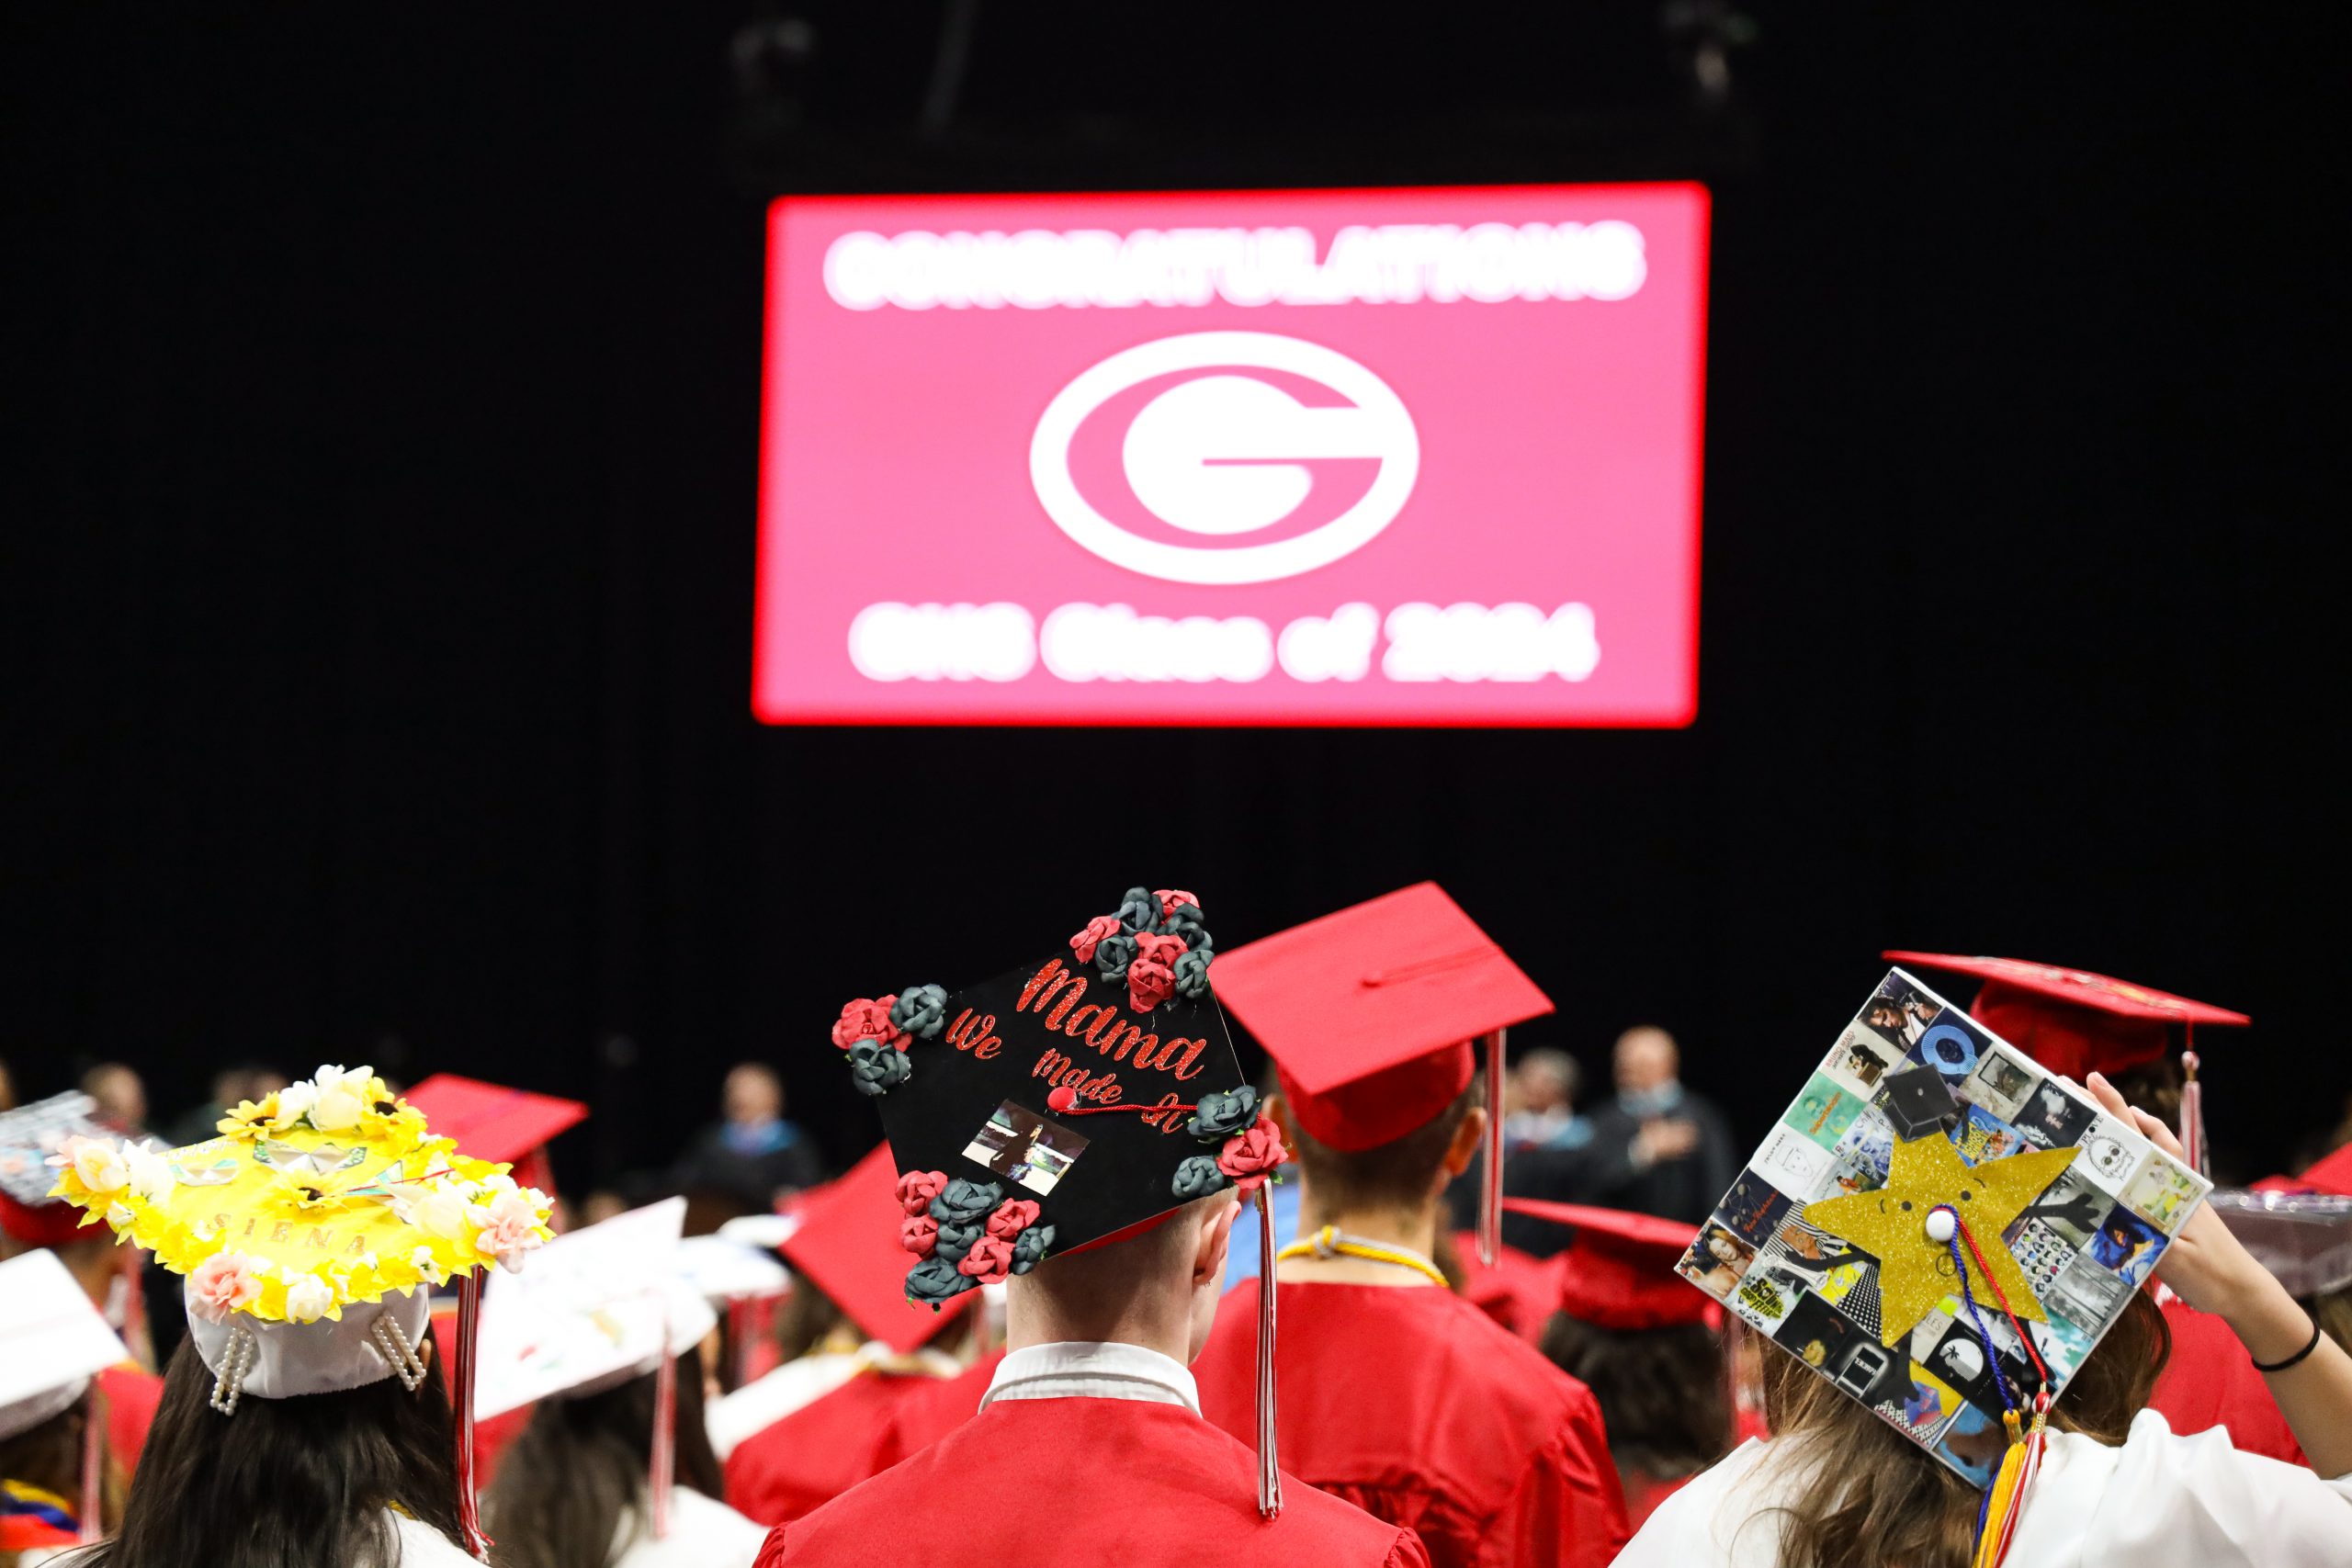 In the background is a screen with a large red G. In the foreground are three students with decorated caps